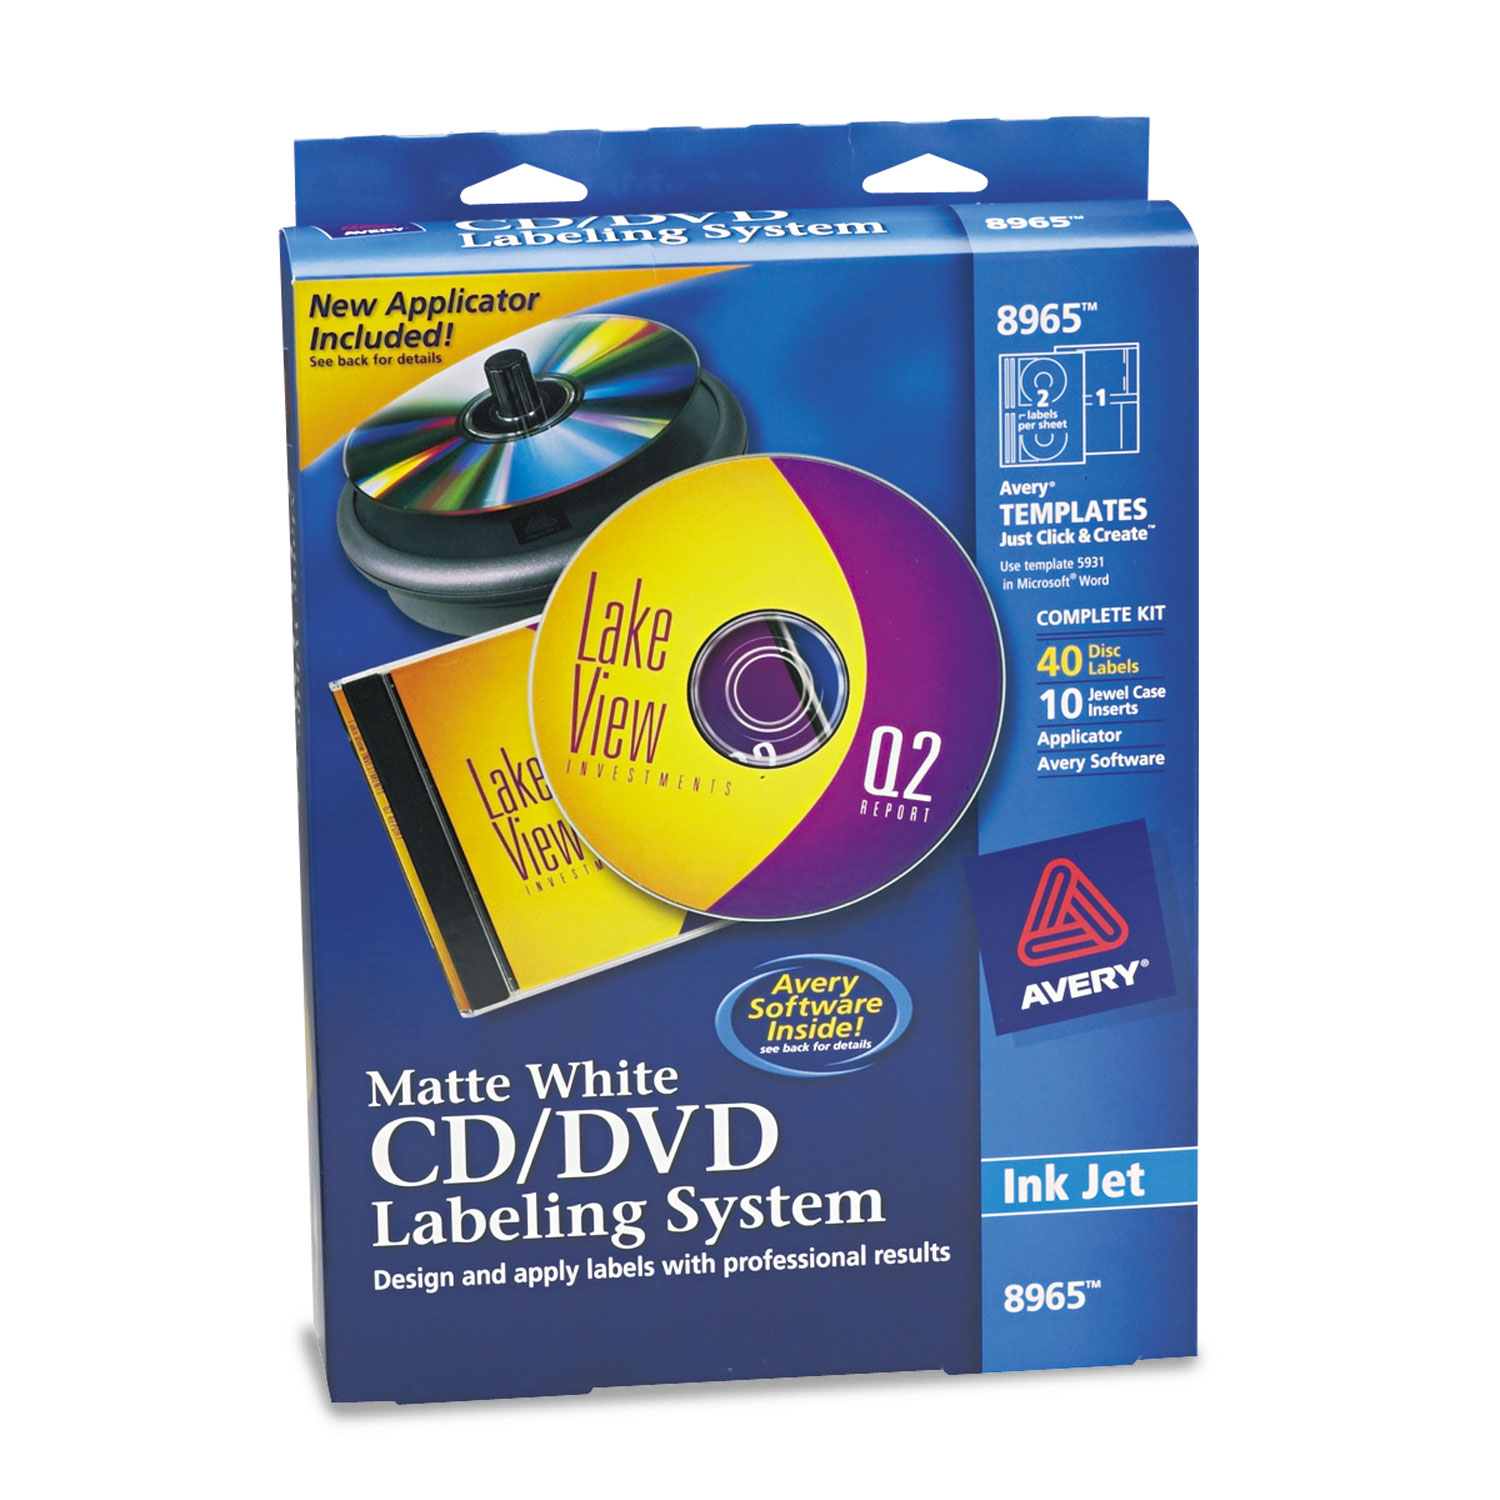  Avery 08965 CD/DVD Design Labeling Kits, Matte White, 40 Inkjet Labels and 10 Inserts (AVE8965) 